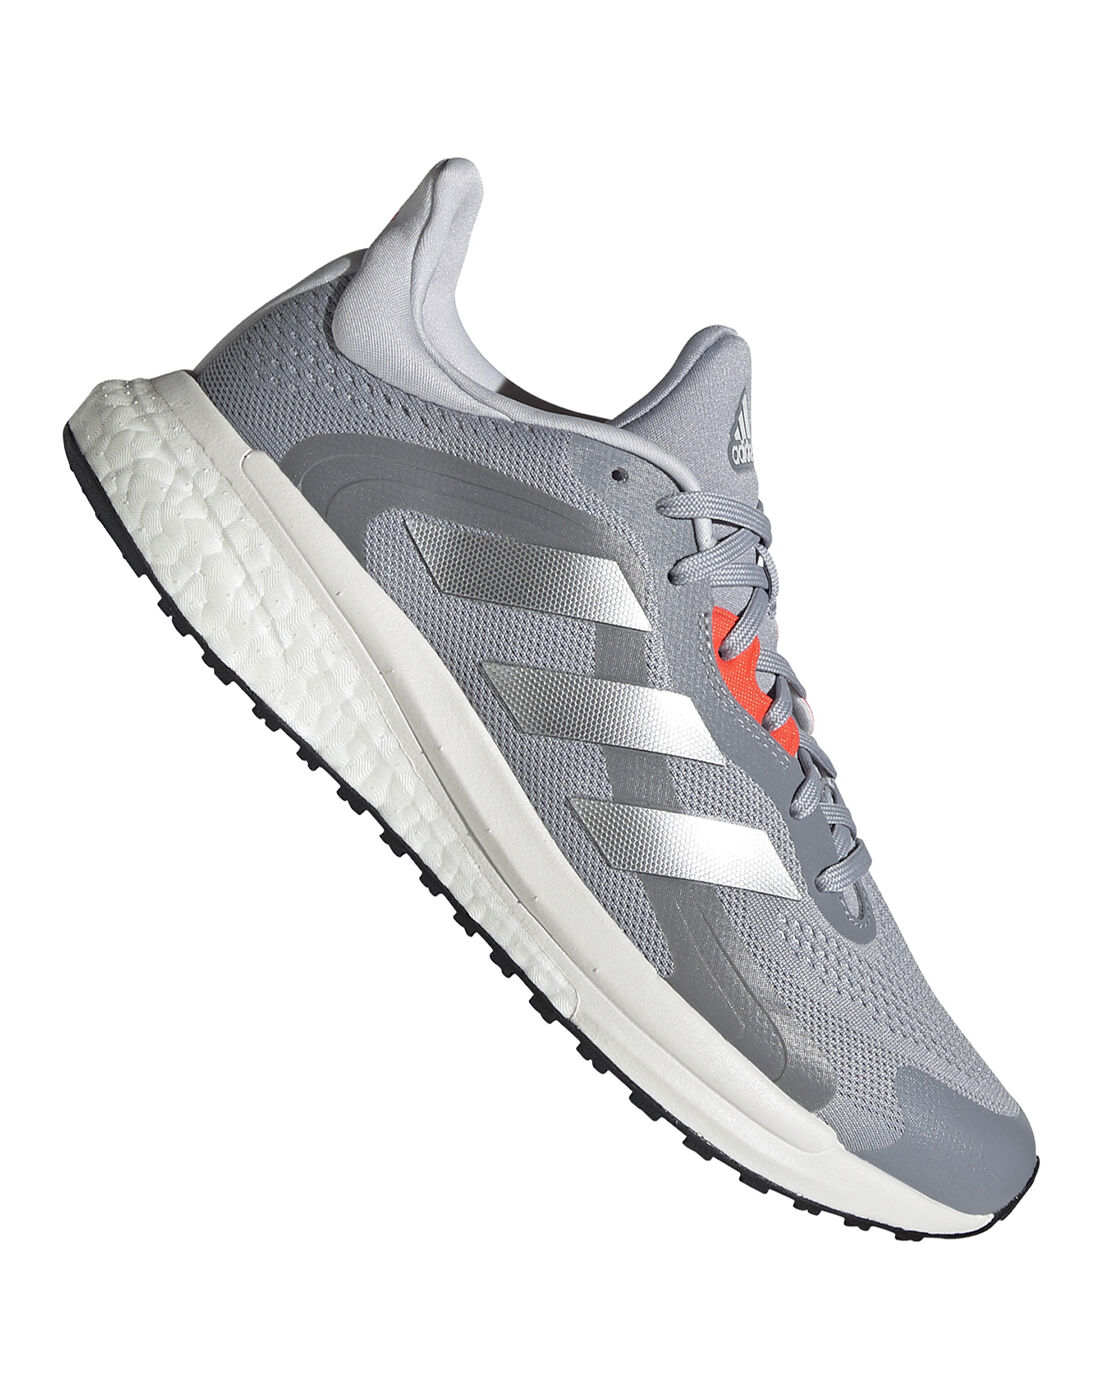 adidas zx flux white rose gold new 